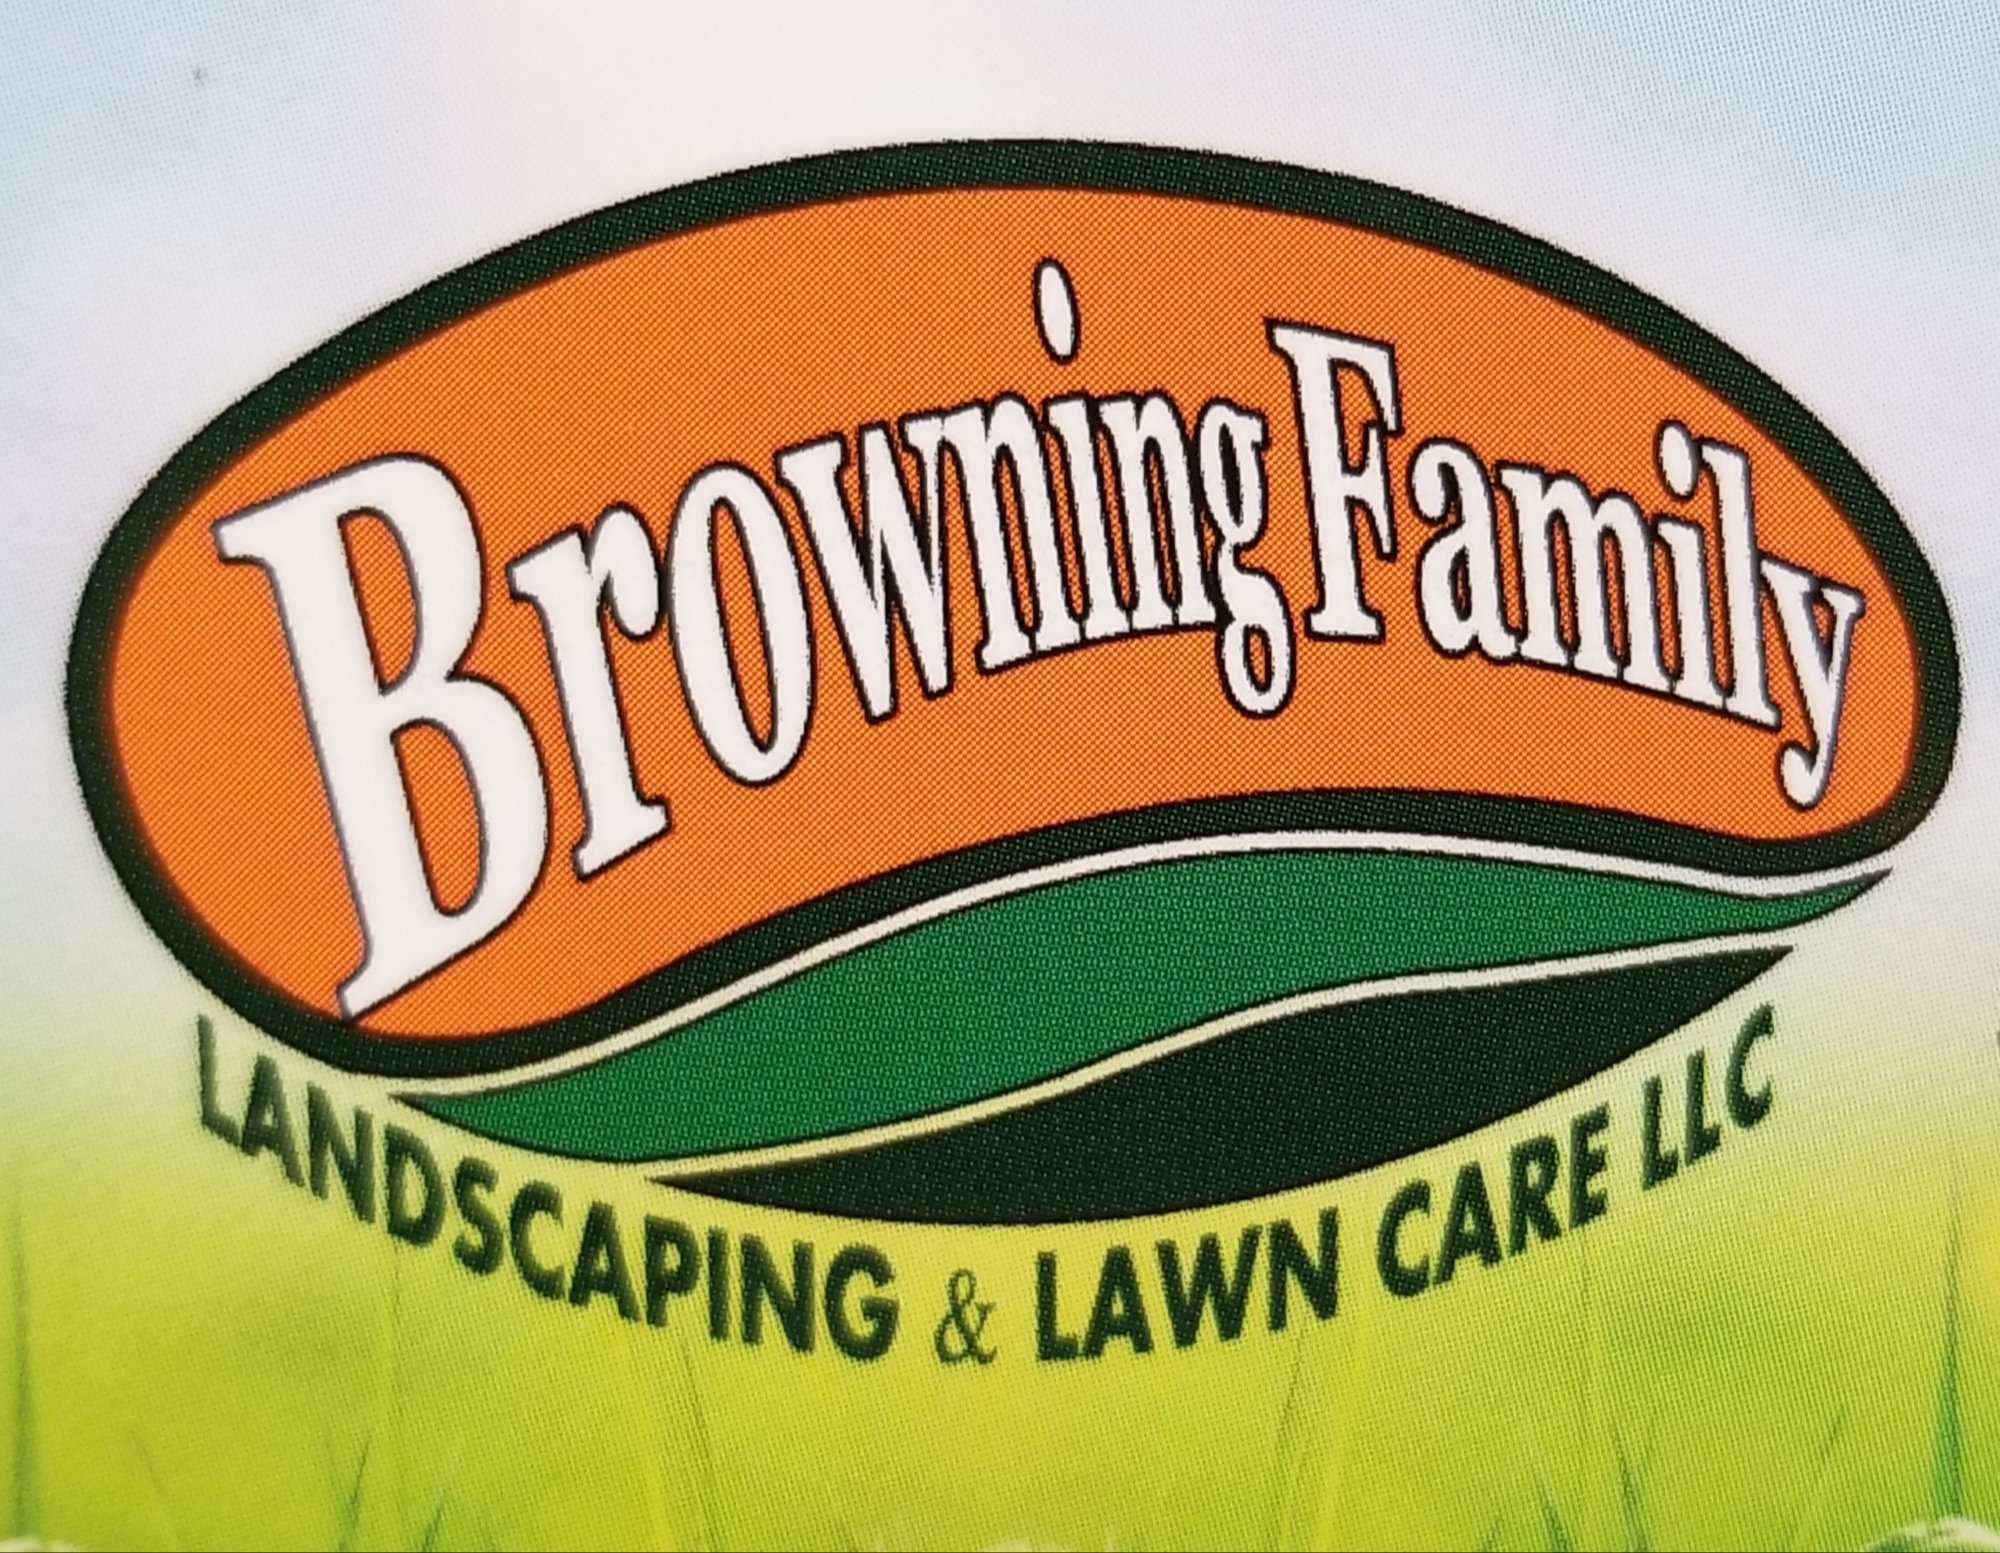 Browning Family Landscaping & Lawn Care - Logo